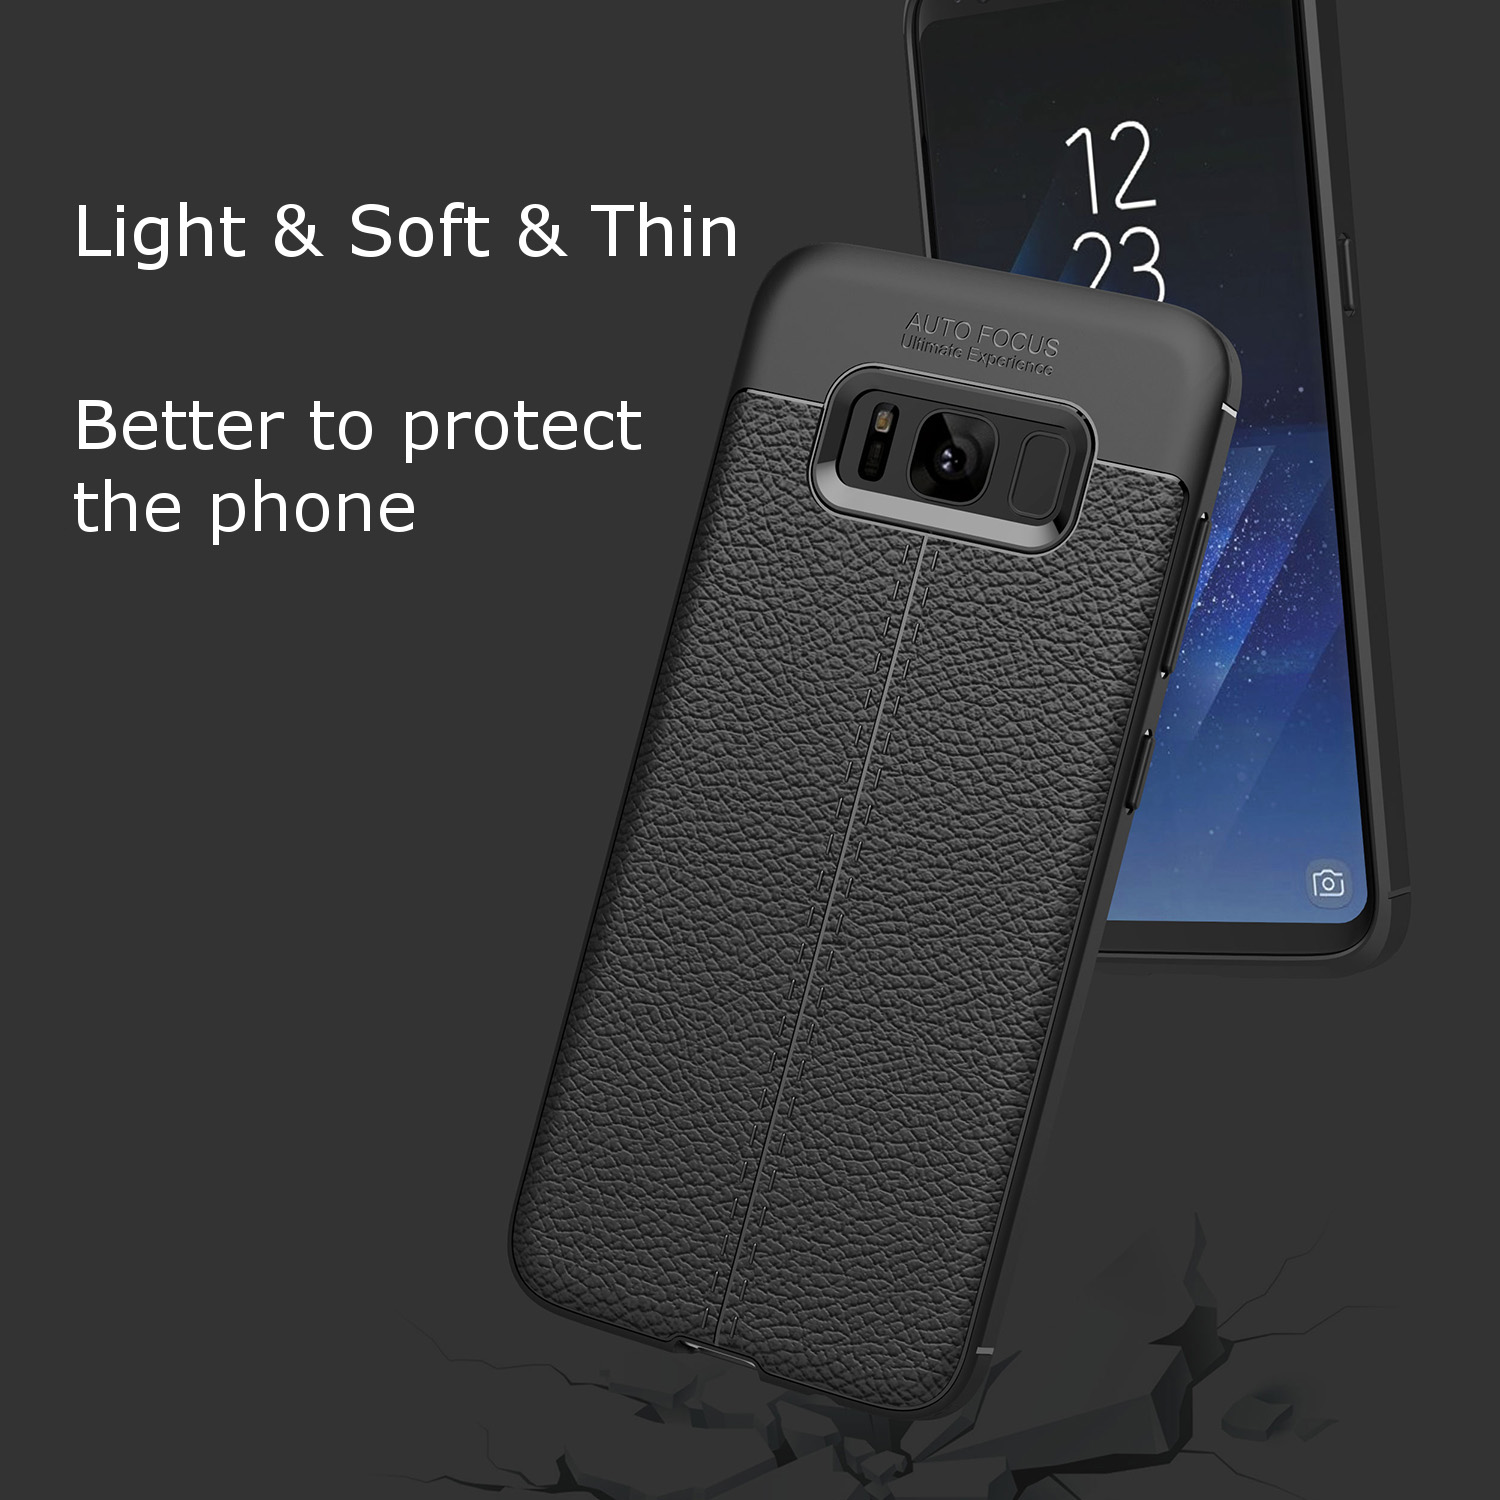 Bakeeytrade-Anti-Fingerprint-Soft-TPU-Litchi-Leather-Case-Cover-for-Samsung-Galaxy-Note-8S8S8-Plus-1206658-4